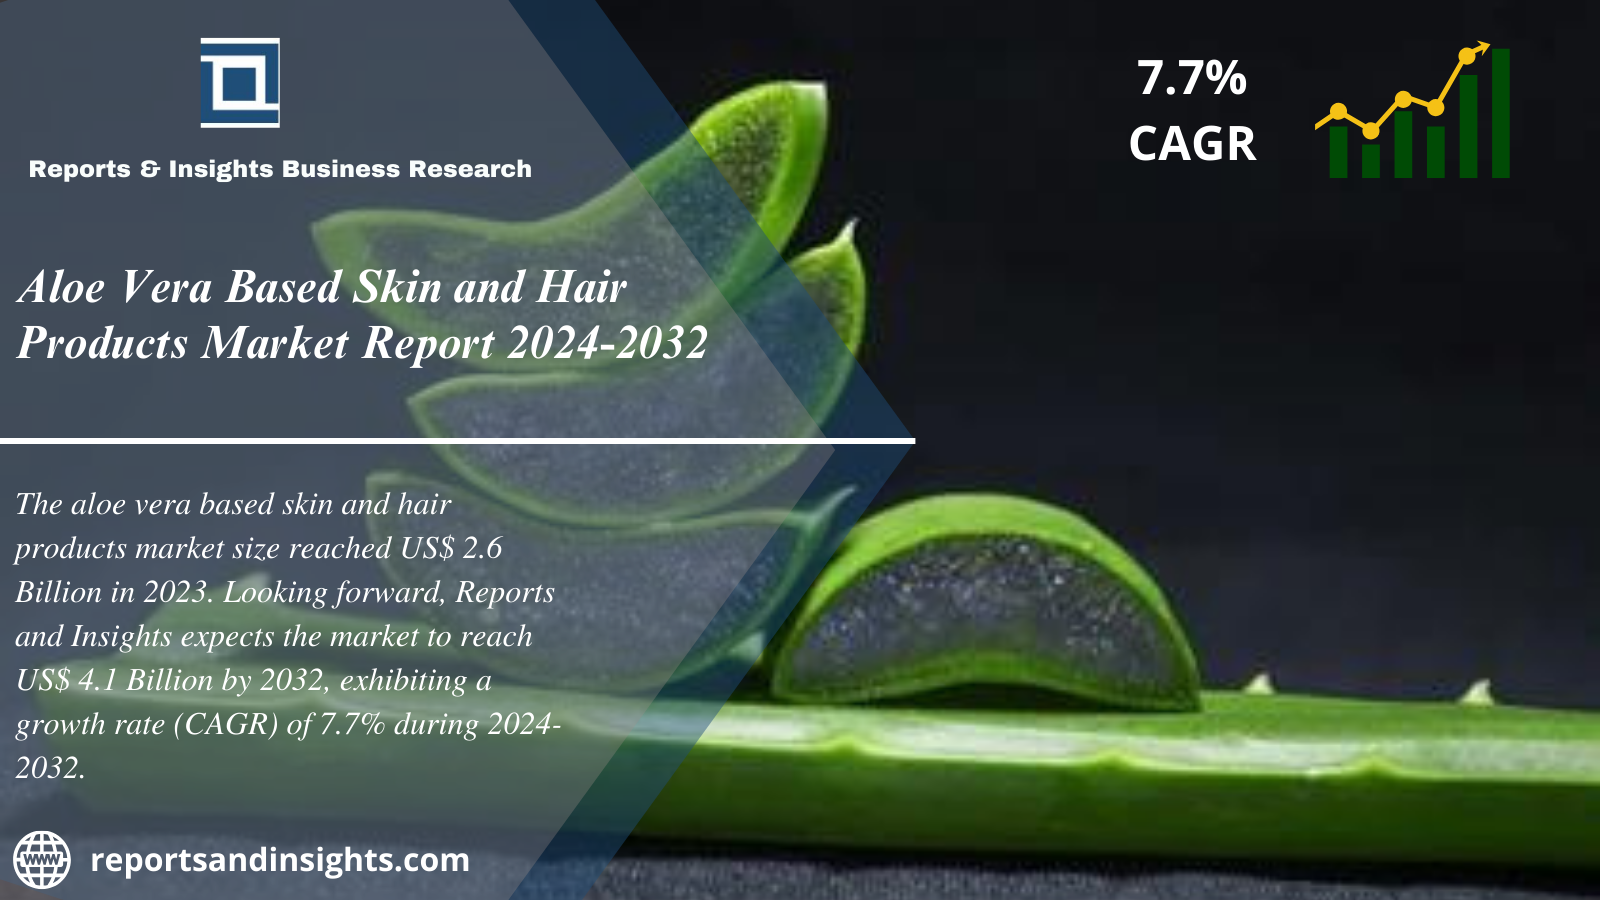 Aloe Vera Based Skin and Hair Products Market 2024 to 2032; Size, Share, Growth, Industry Drivers, Future Trends and Scope